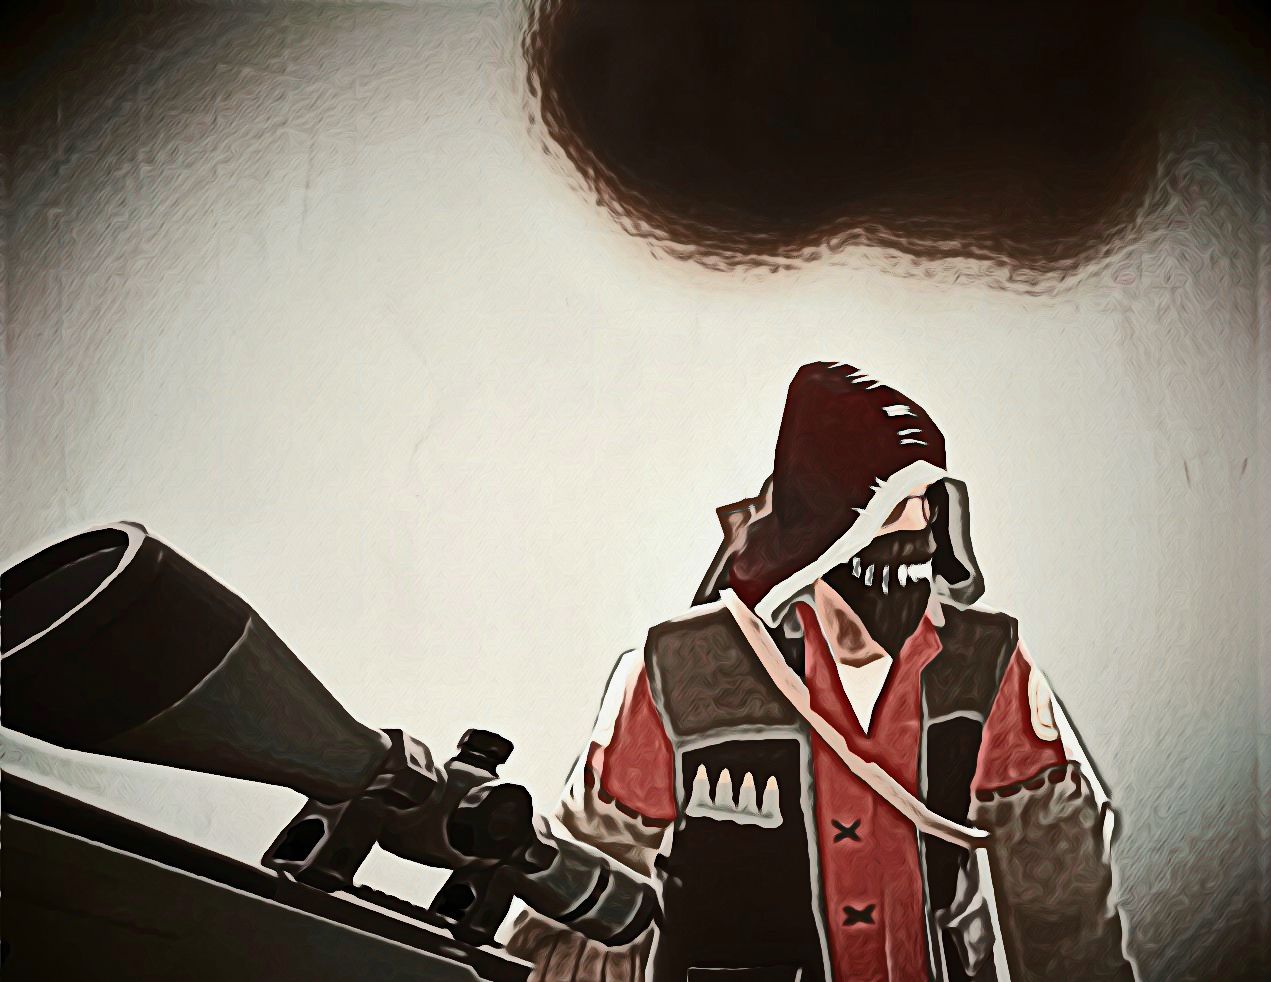 TF2 sniper by Quackers